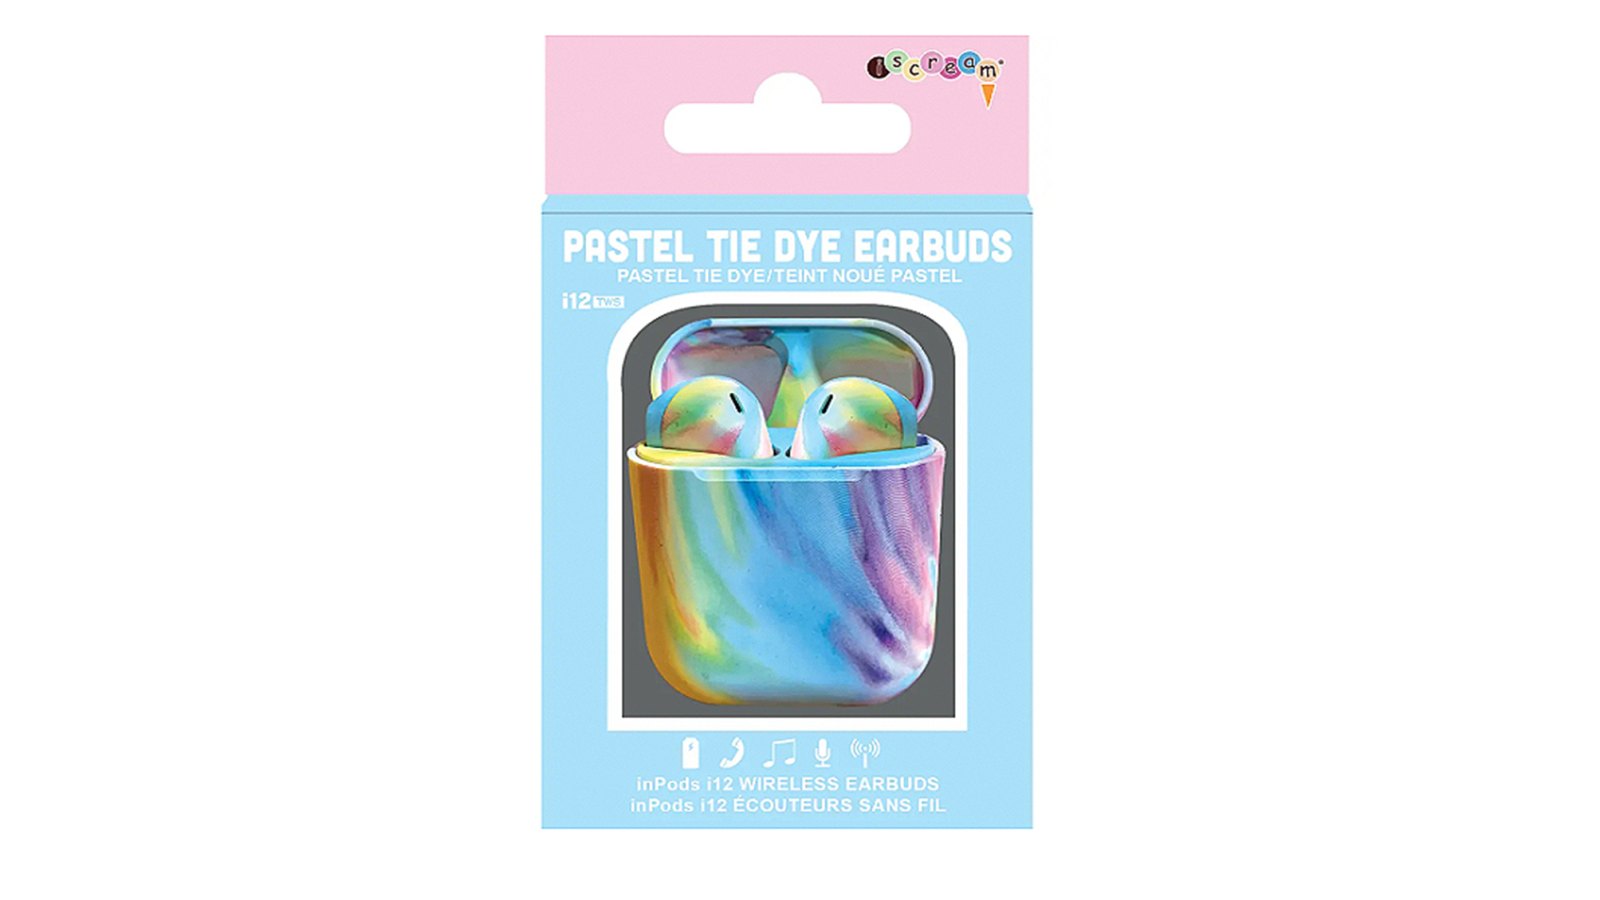 Iscream Pastel Tie Dye Earbuds with Case